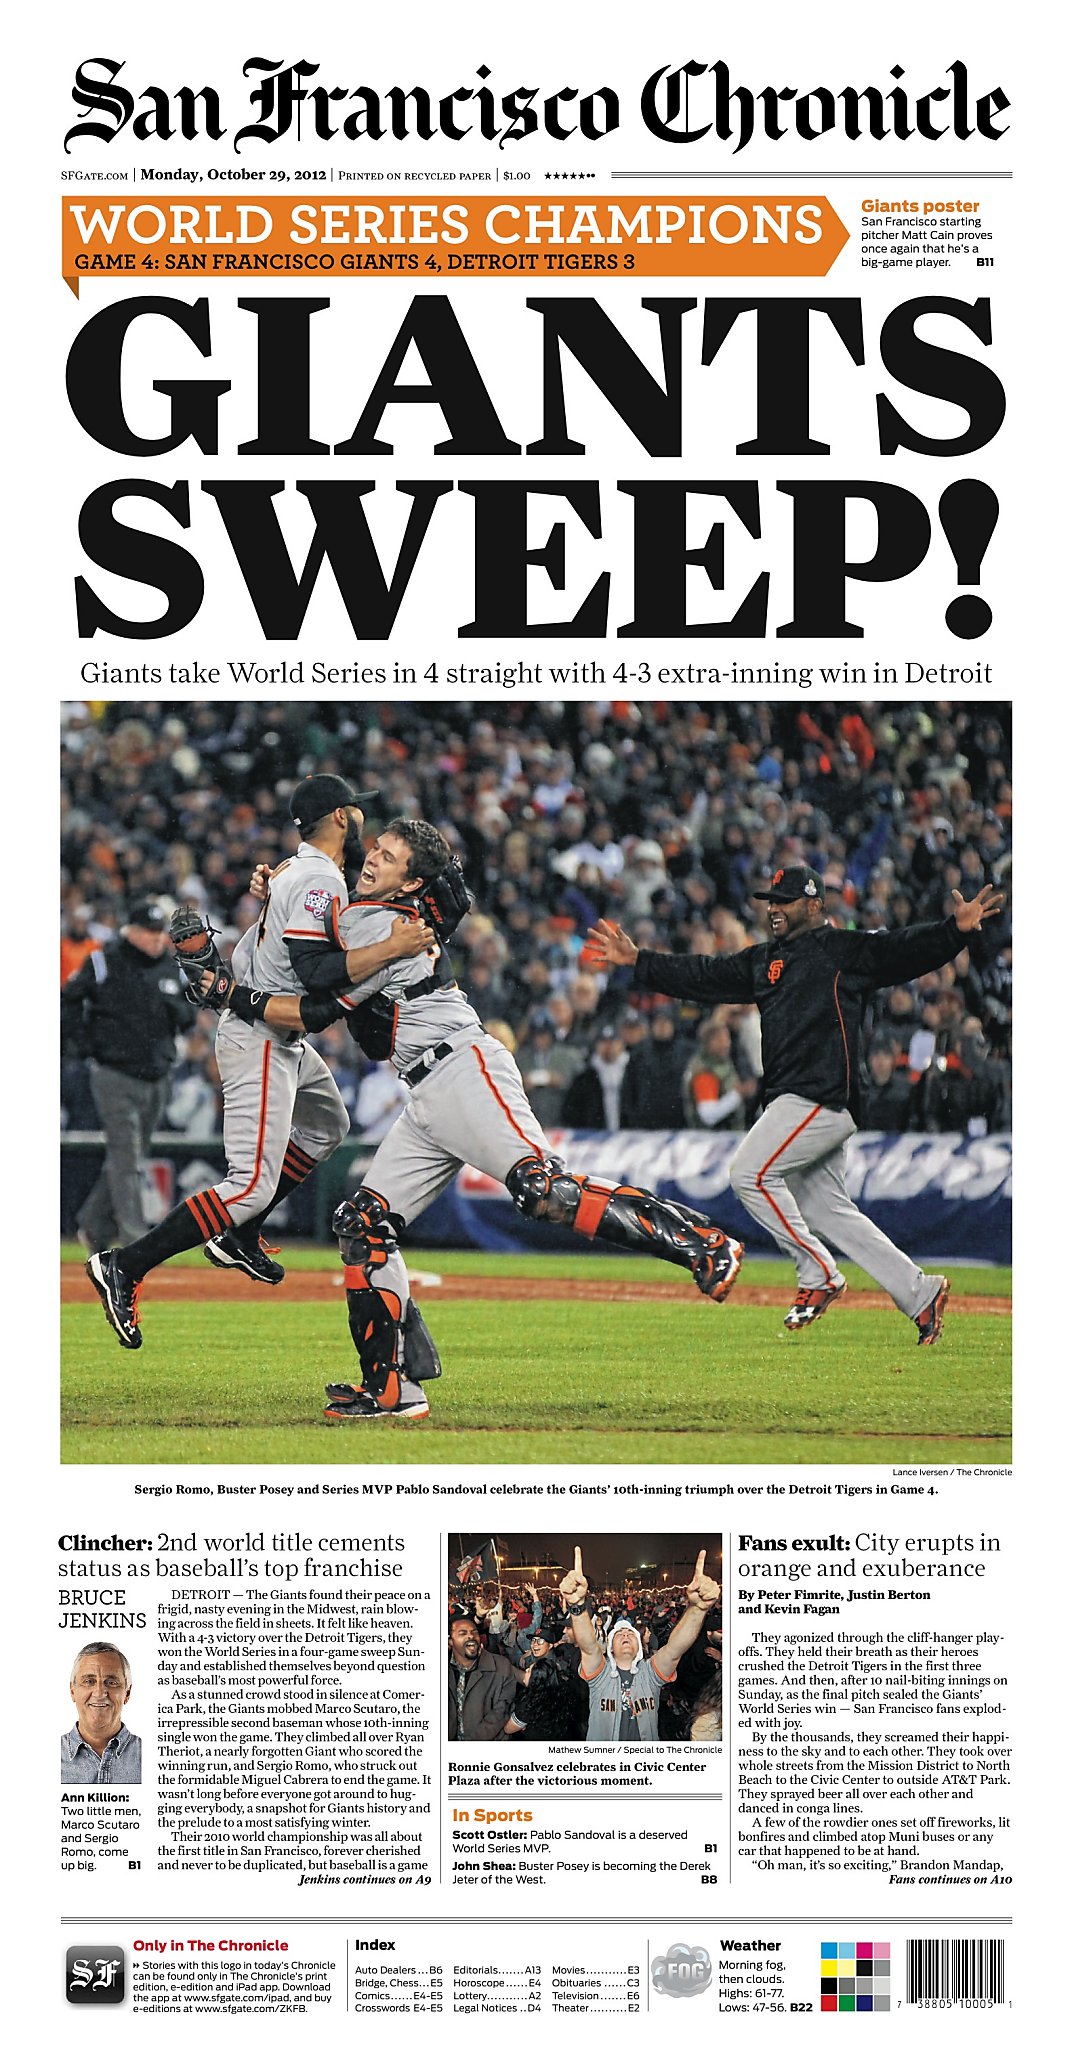 Giants 4, Tigers 3: World Series ends both in extra innings and in